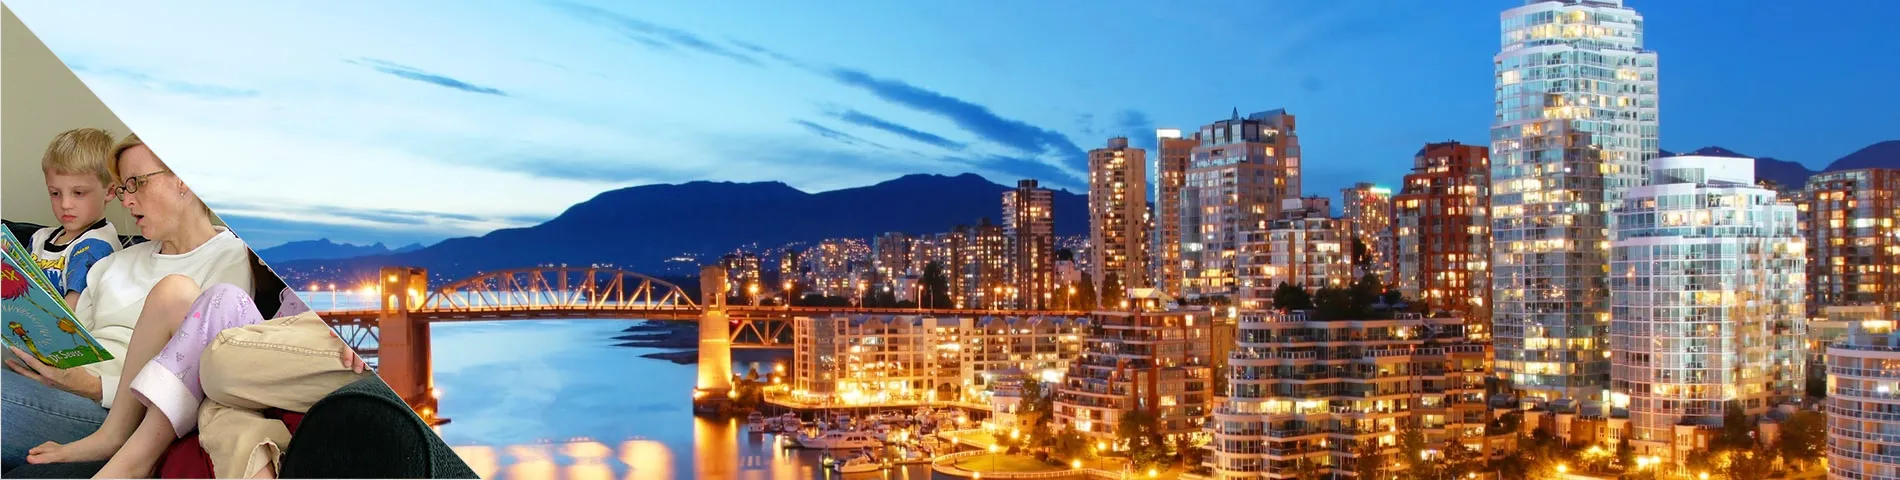 Vancouver - Inglese per famiglie